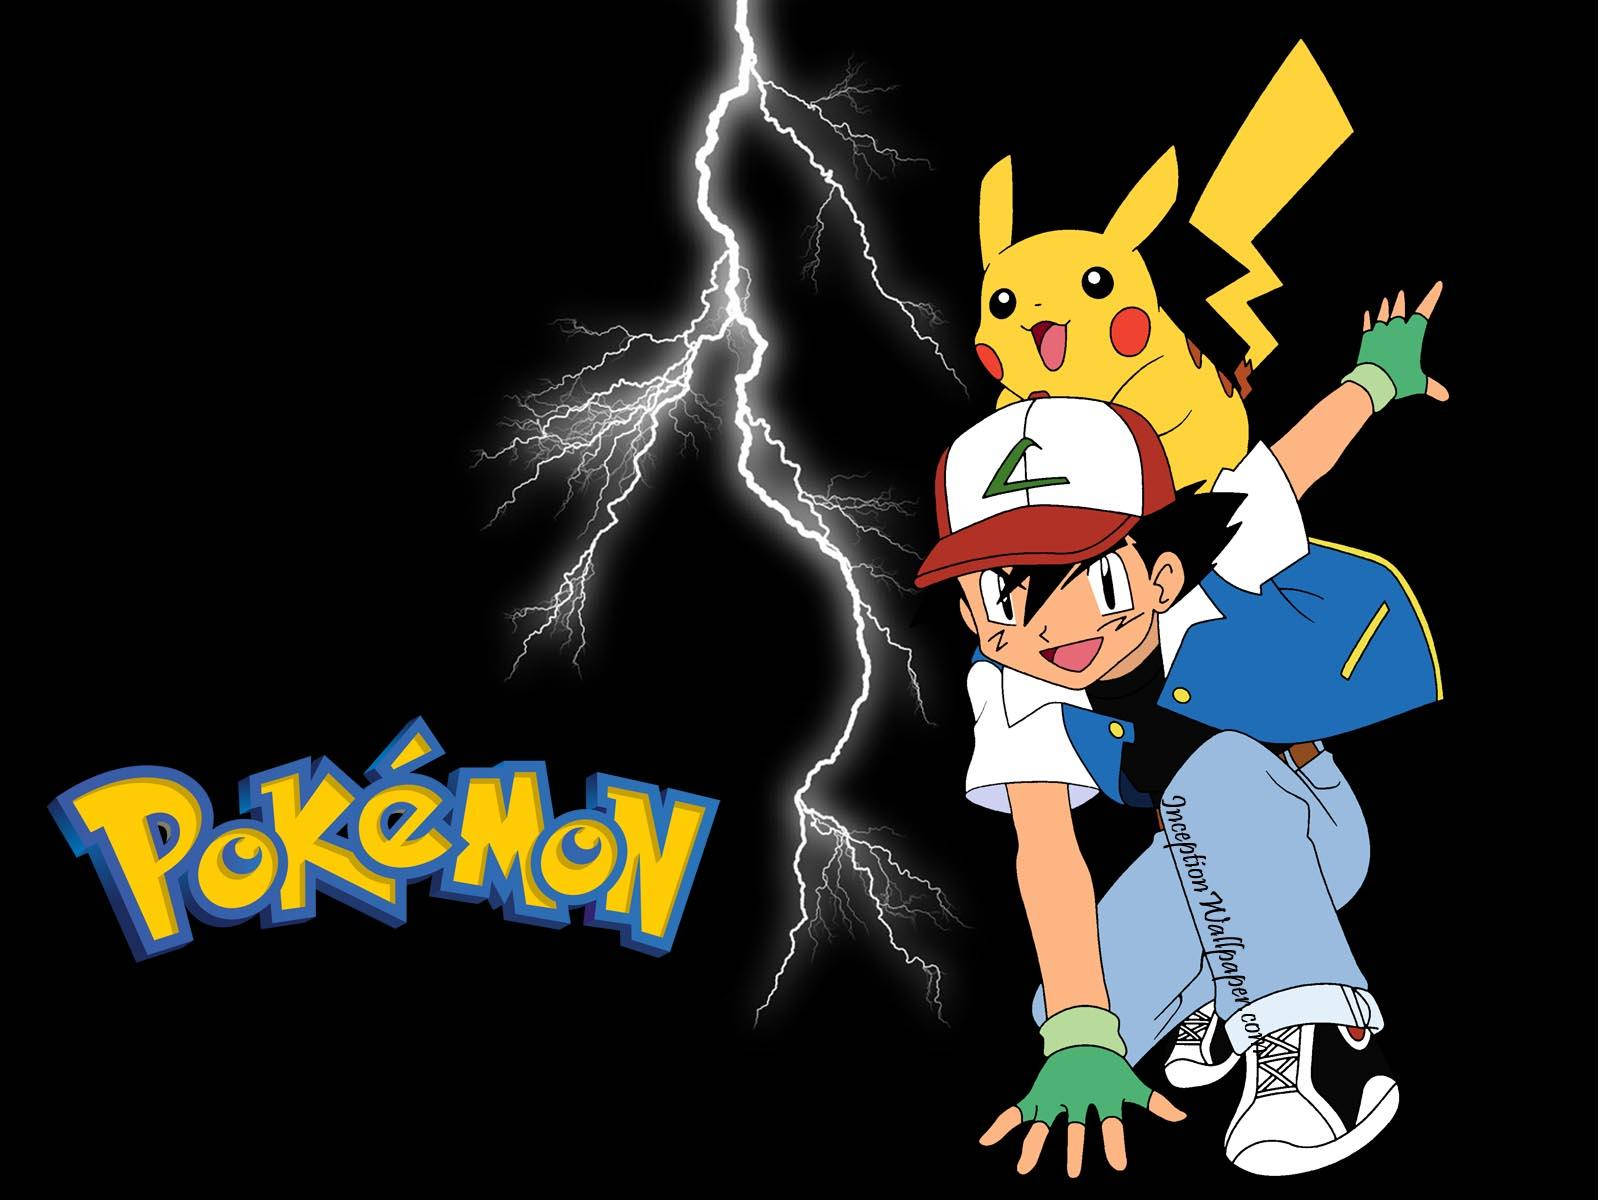 Bond Of Friendship - Hd Picture Of Ash And Pikachu Wallpaper